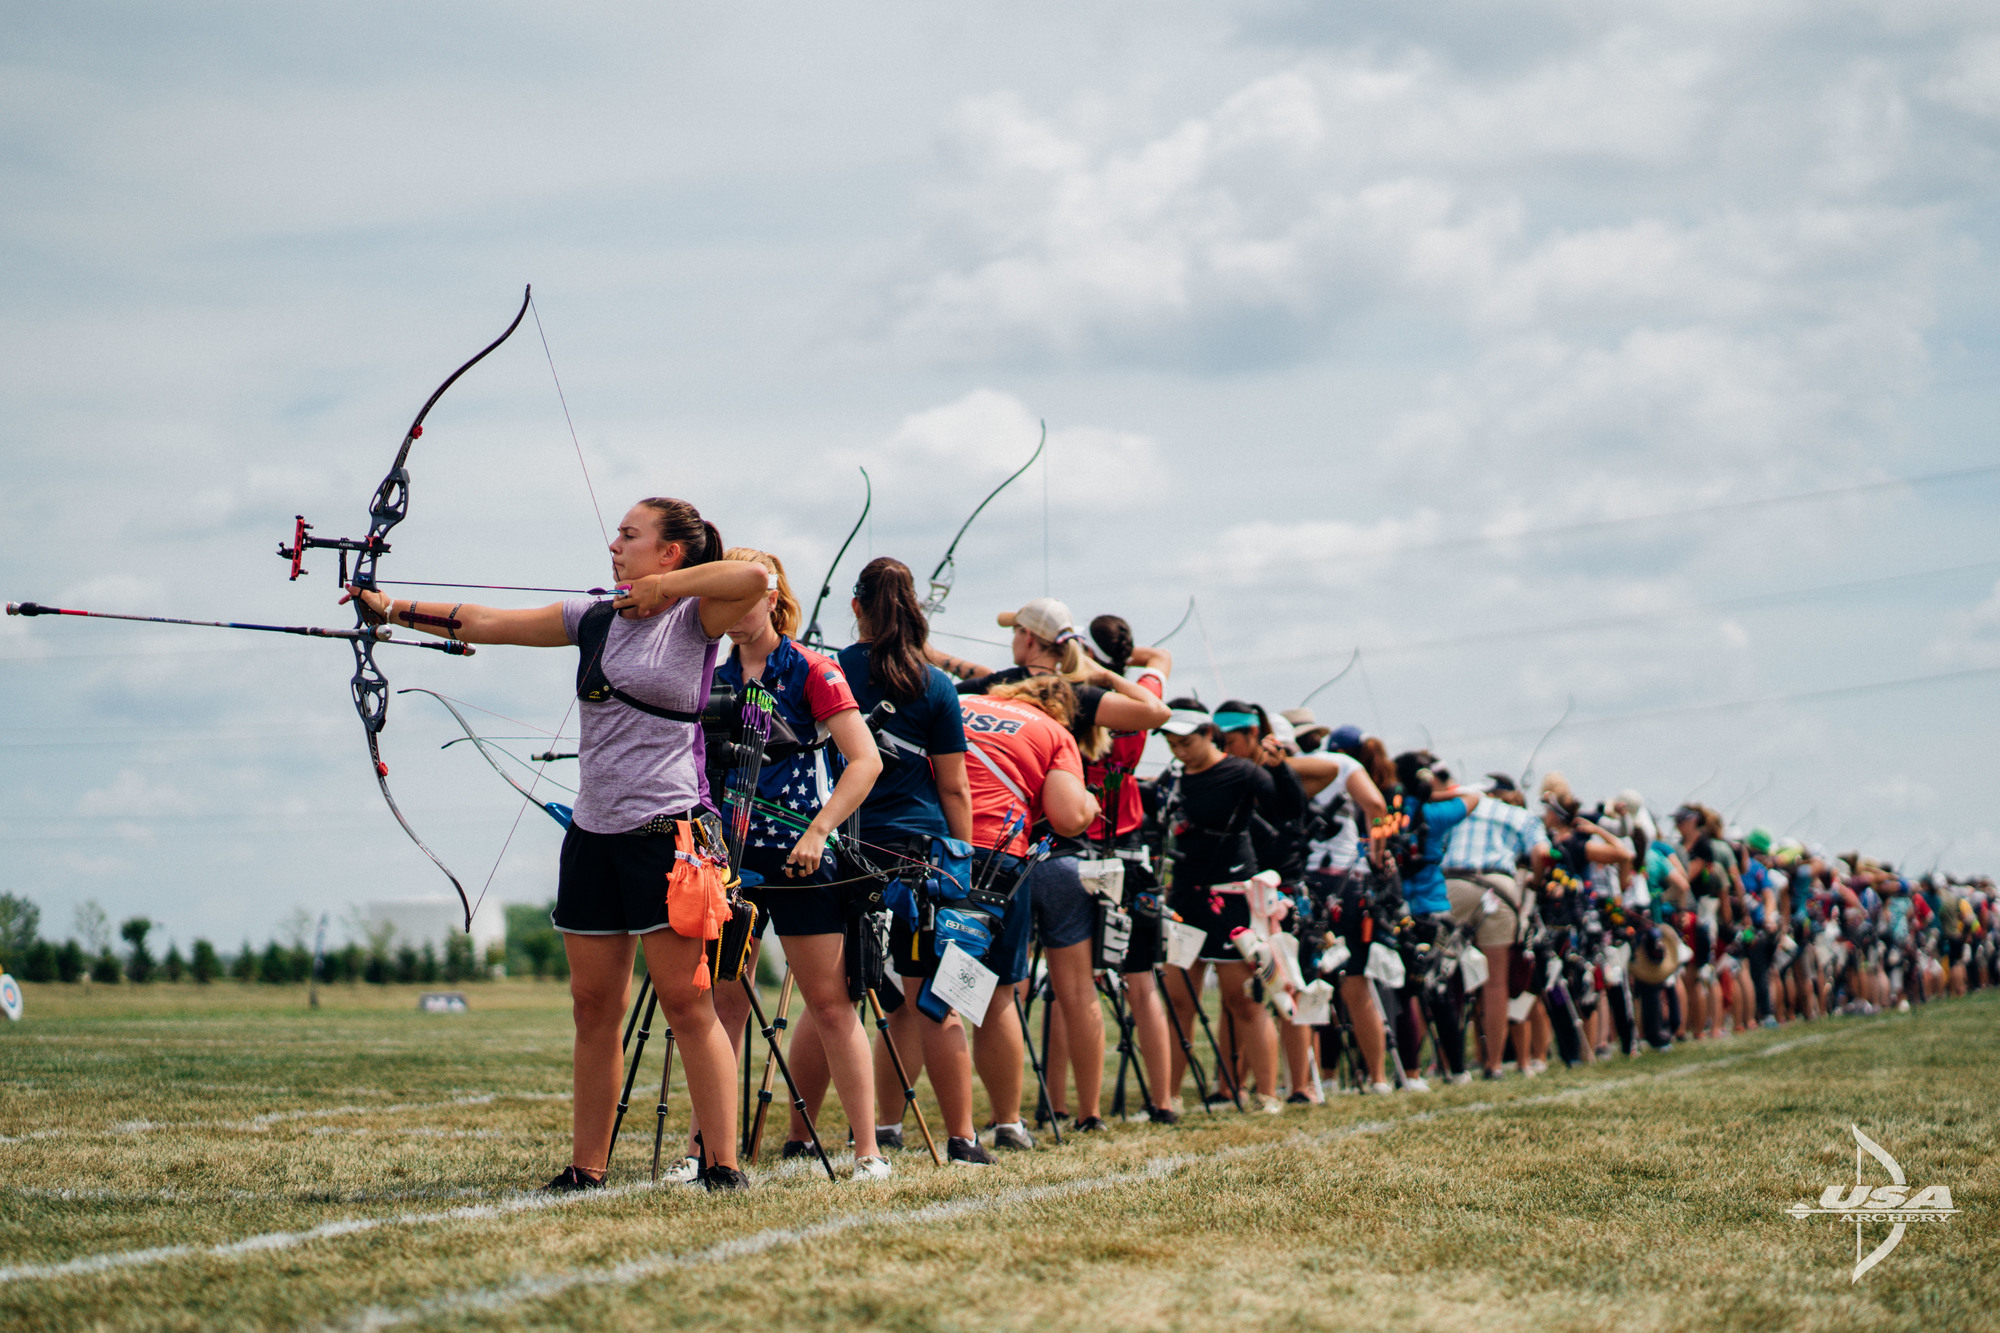 USA Archery Crowns 135th National Target Champions and Wraps Stage One